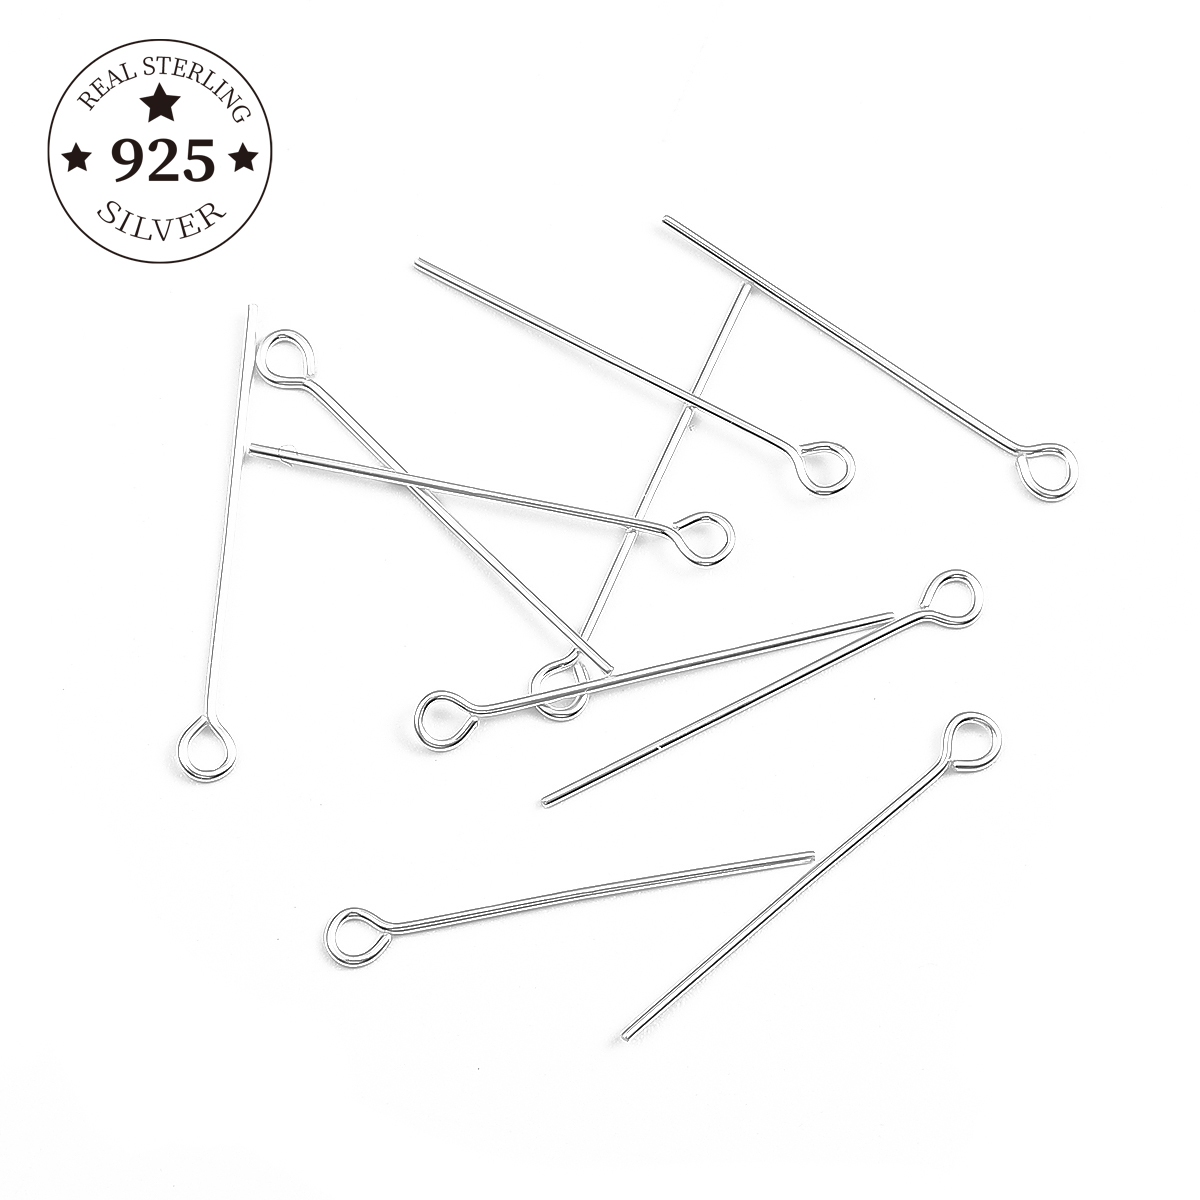 Wholesale Silver Plated Ball Head Eye Pins Jewelry Findings 15/20//25/30/40/50mm 